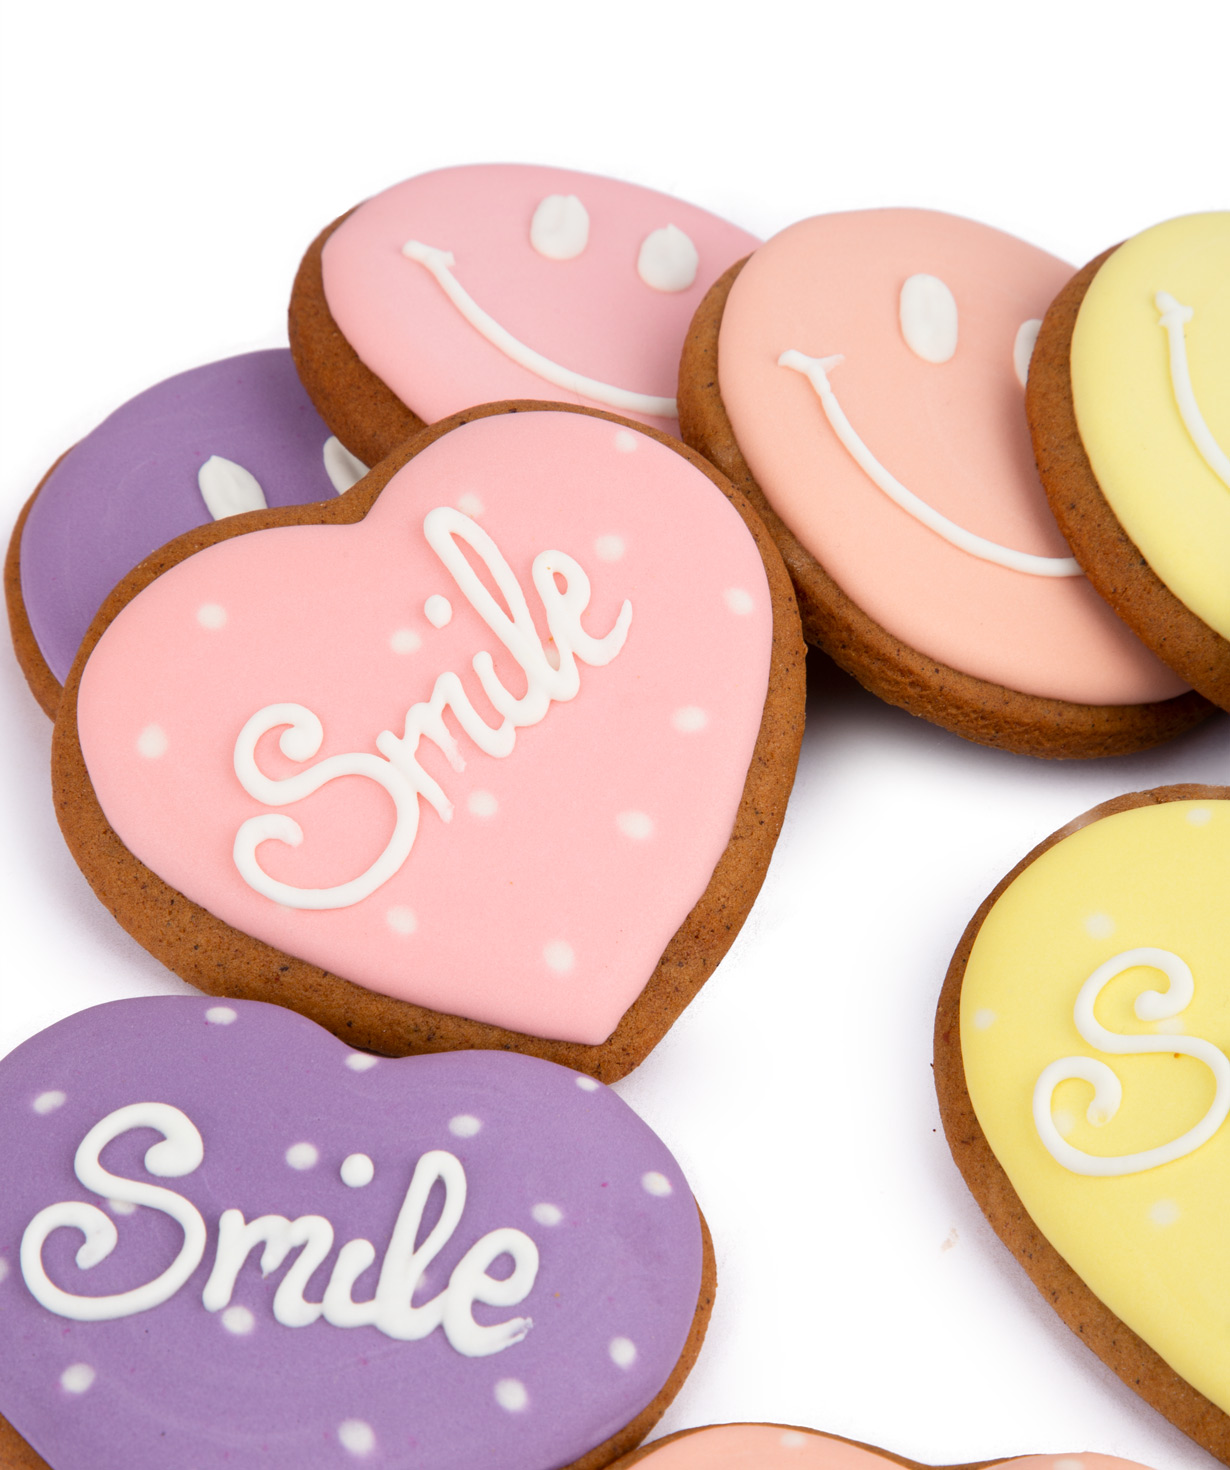 Cookies ''Tartist'' Hearts and smiles